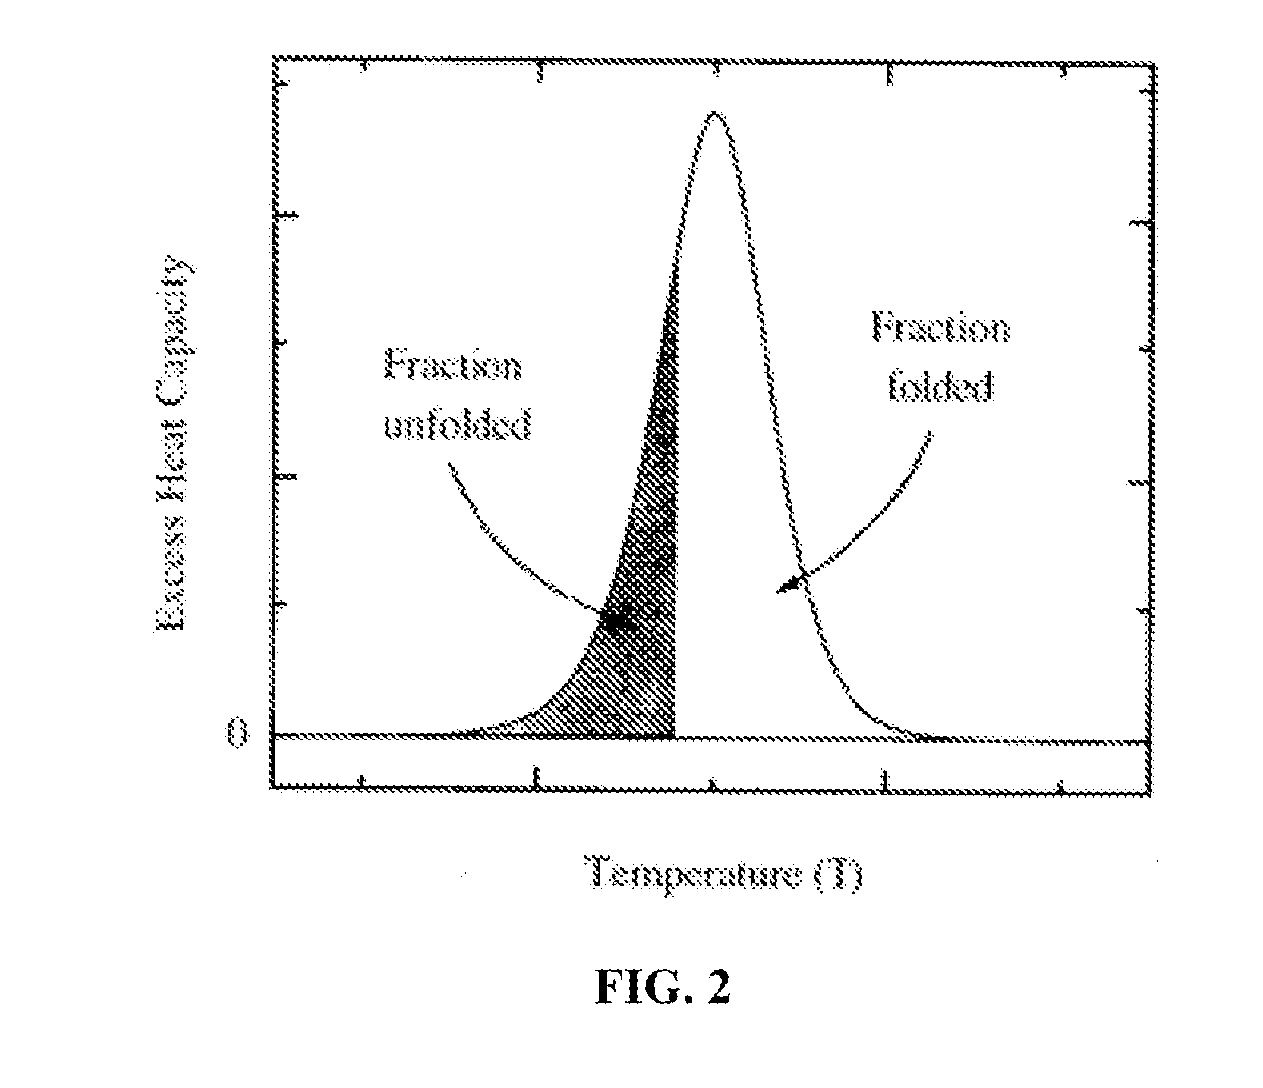 Proteomic profiling method useful for condition diagnosis and monitoring, composition screening, and therapeutic monitoring